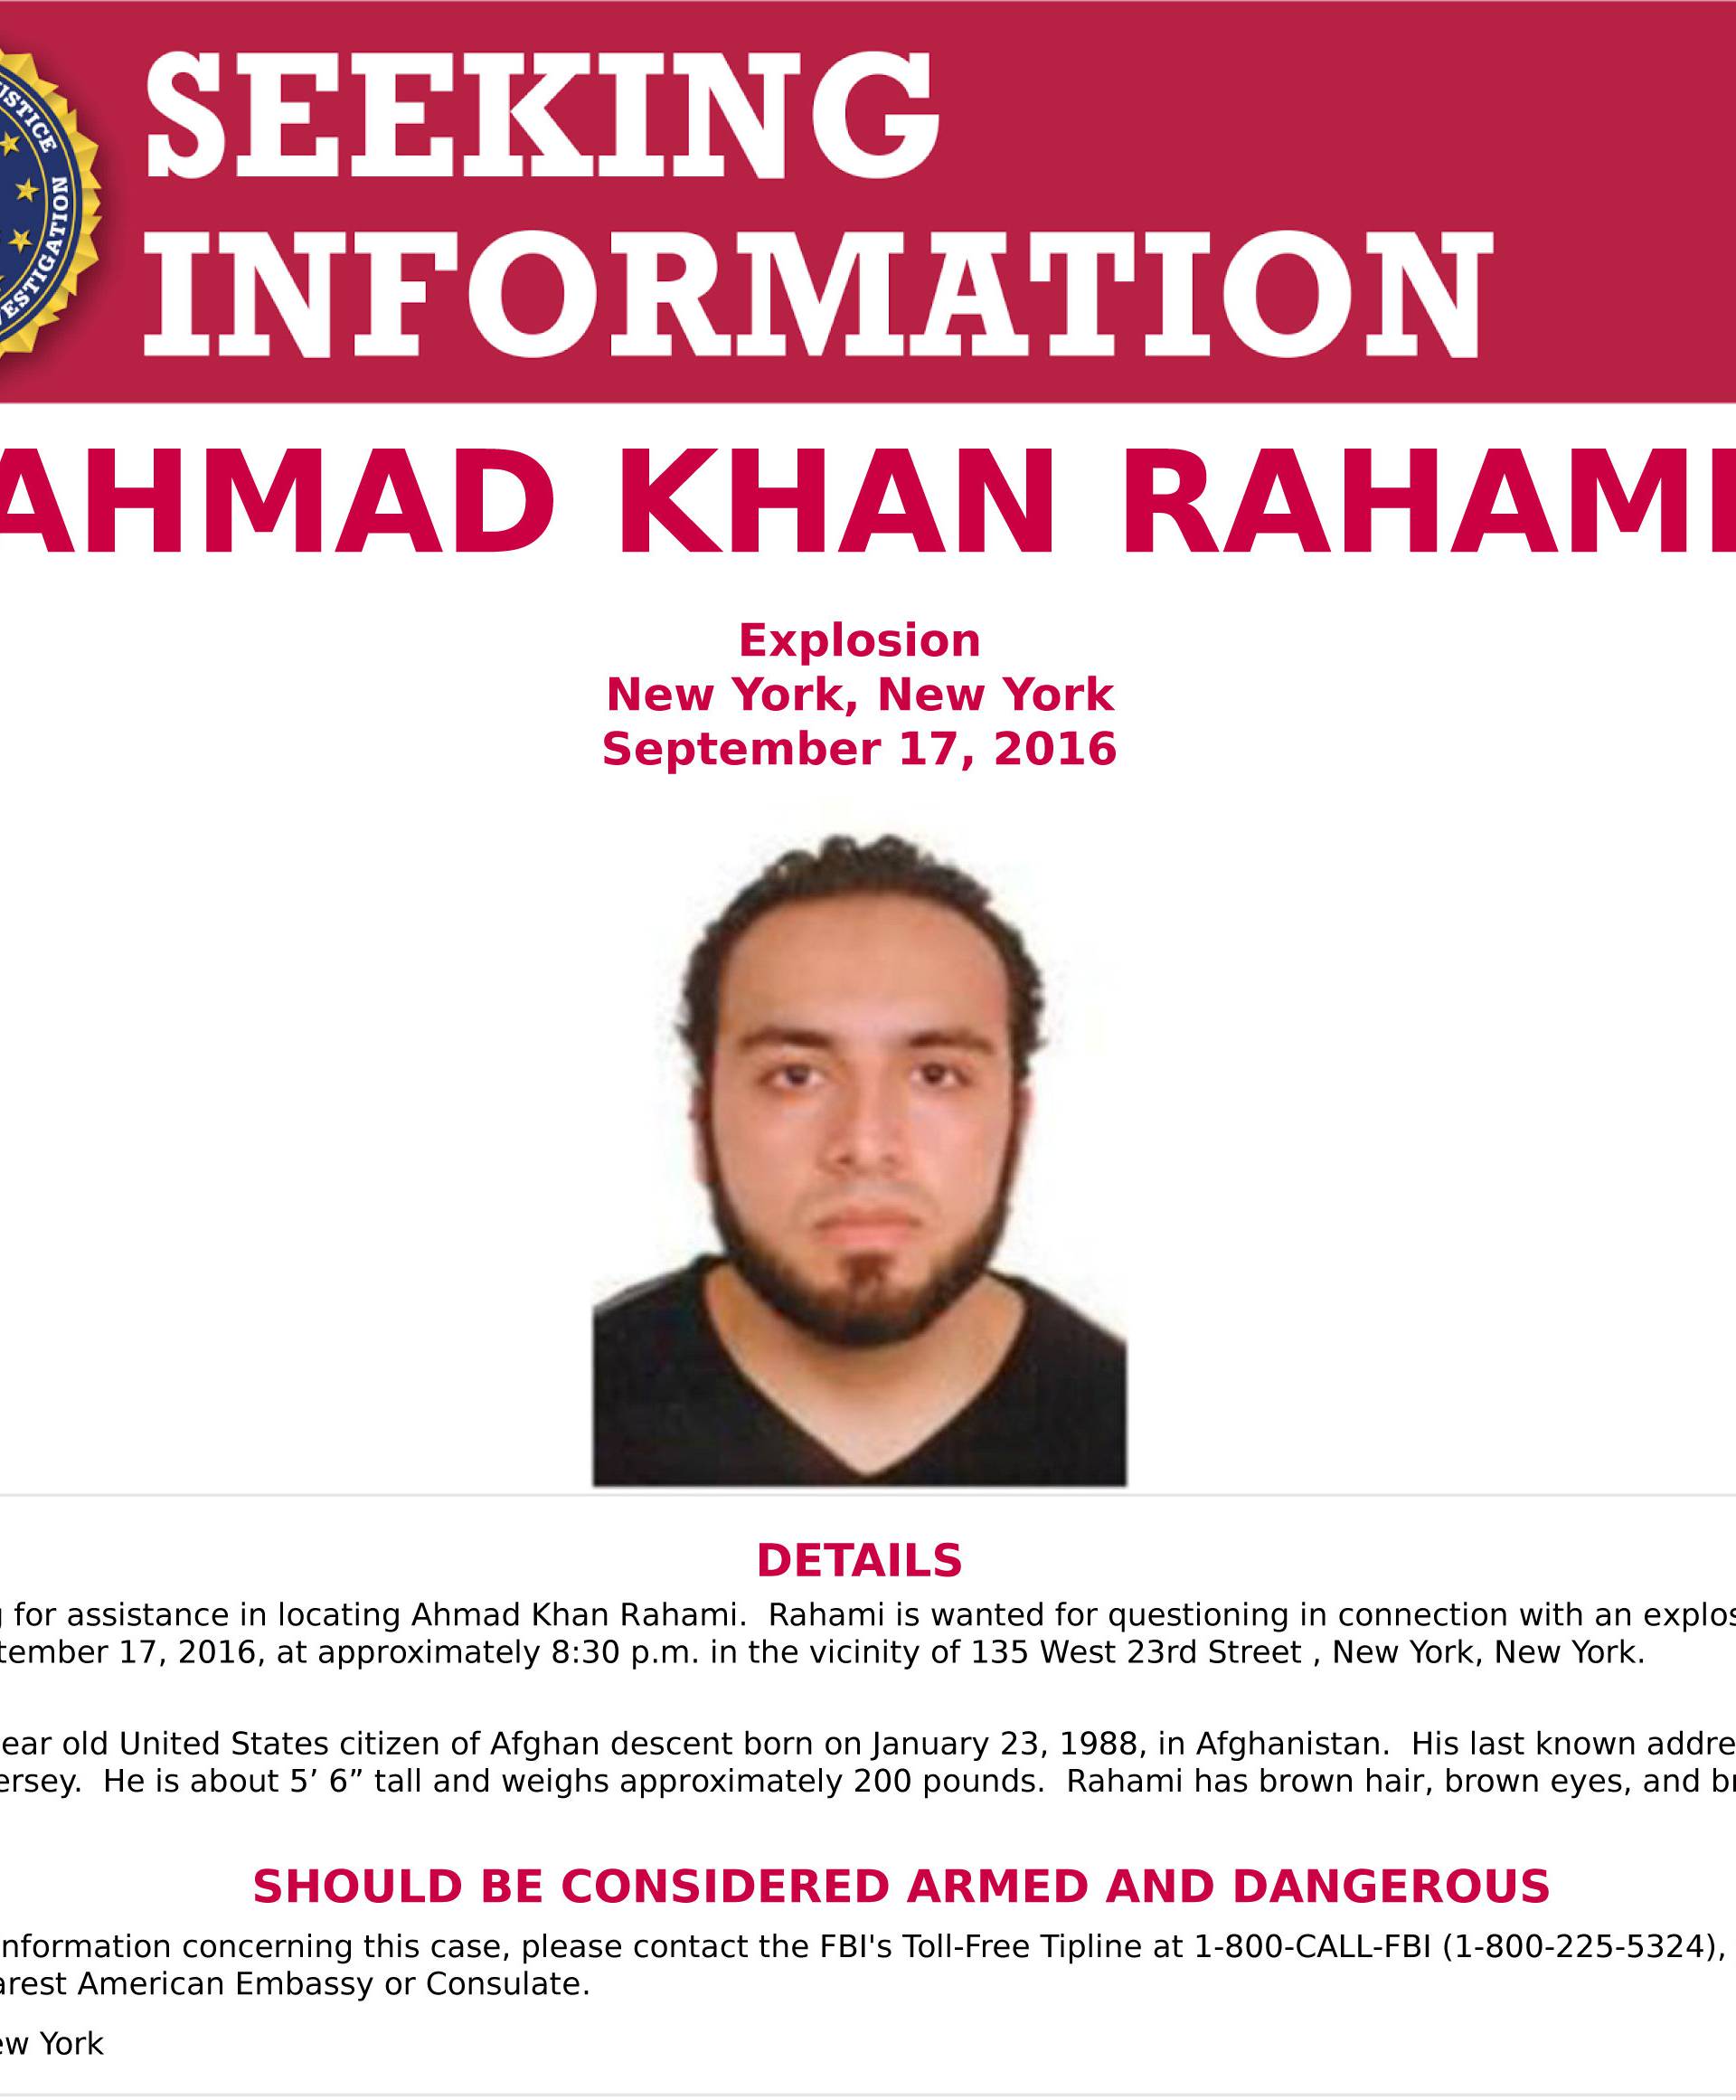 An image of Ahmad Khan Rahami, who is wanted for questioning in connection with an explosion in New York City, is seen in a a poster released by the Federal Bureau of Investigation (FBI)